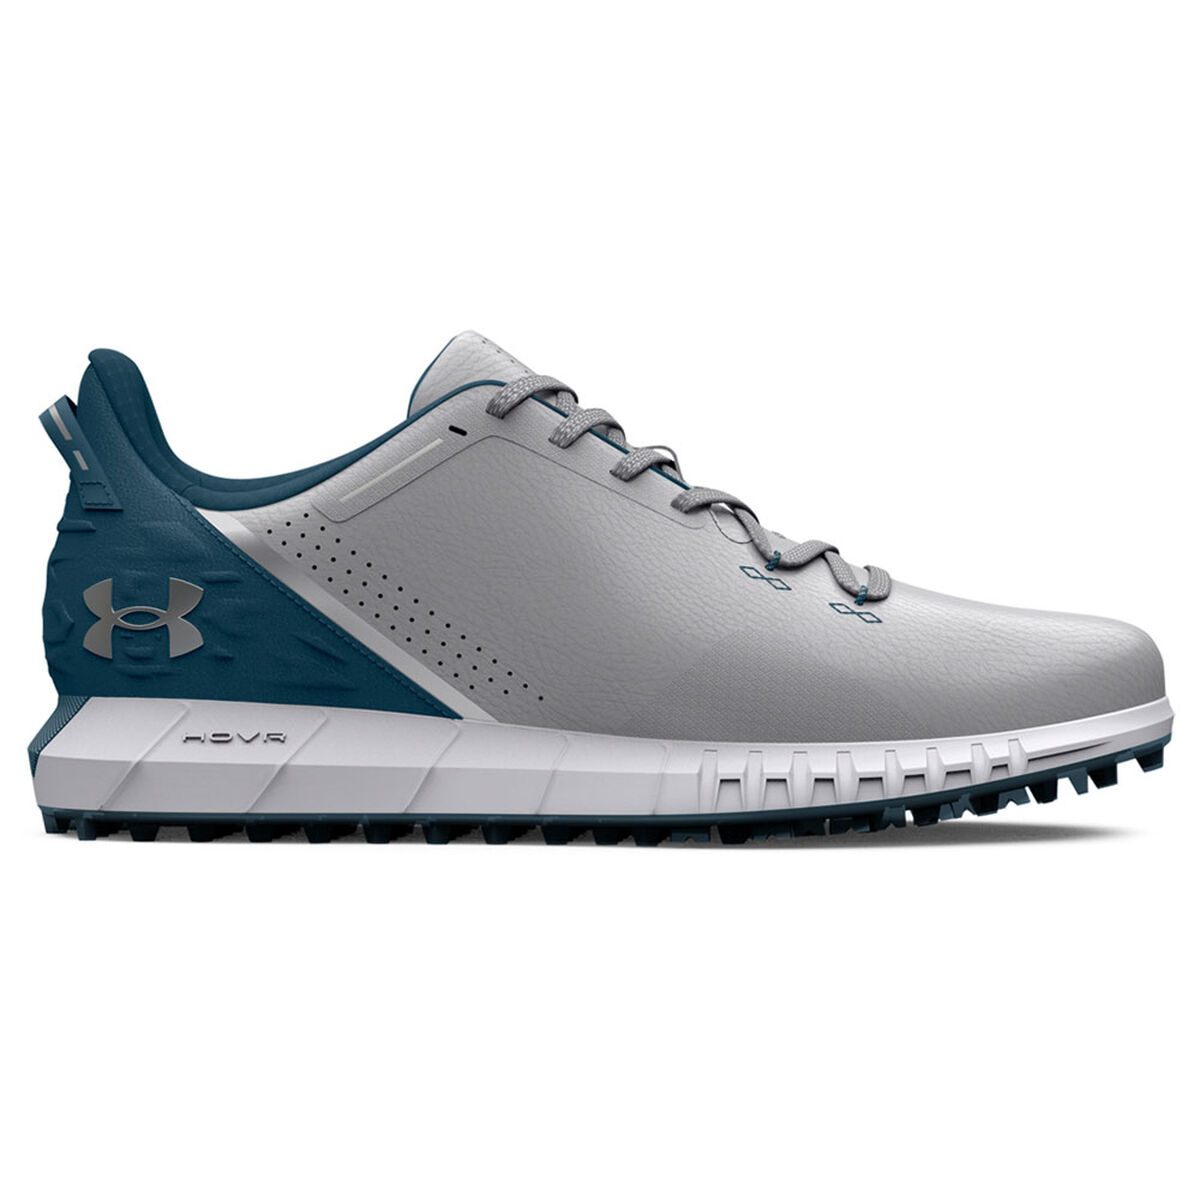 Under Armour Men’s HOVR Drive Waterproof Spikeless Golf Shoes, Mens, Grey/blue/silver, 9, Wide | American Golf